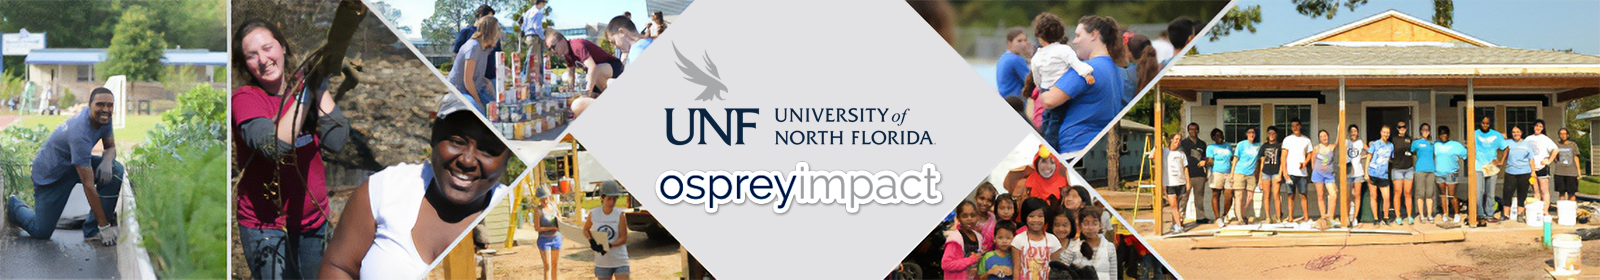 students participating in different volunteer opportunities UNF logo and OspreyImpact is in the center